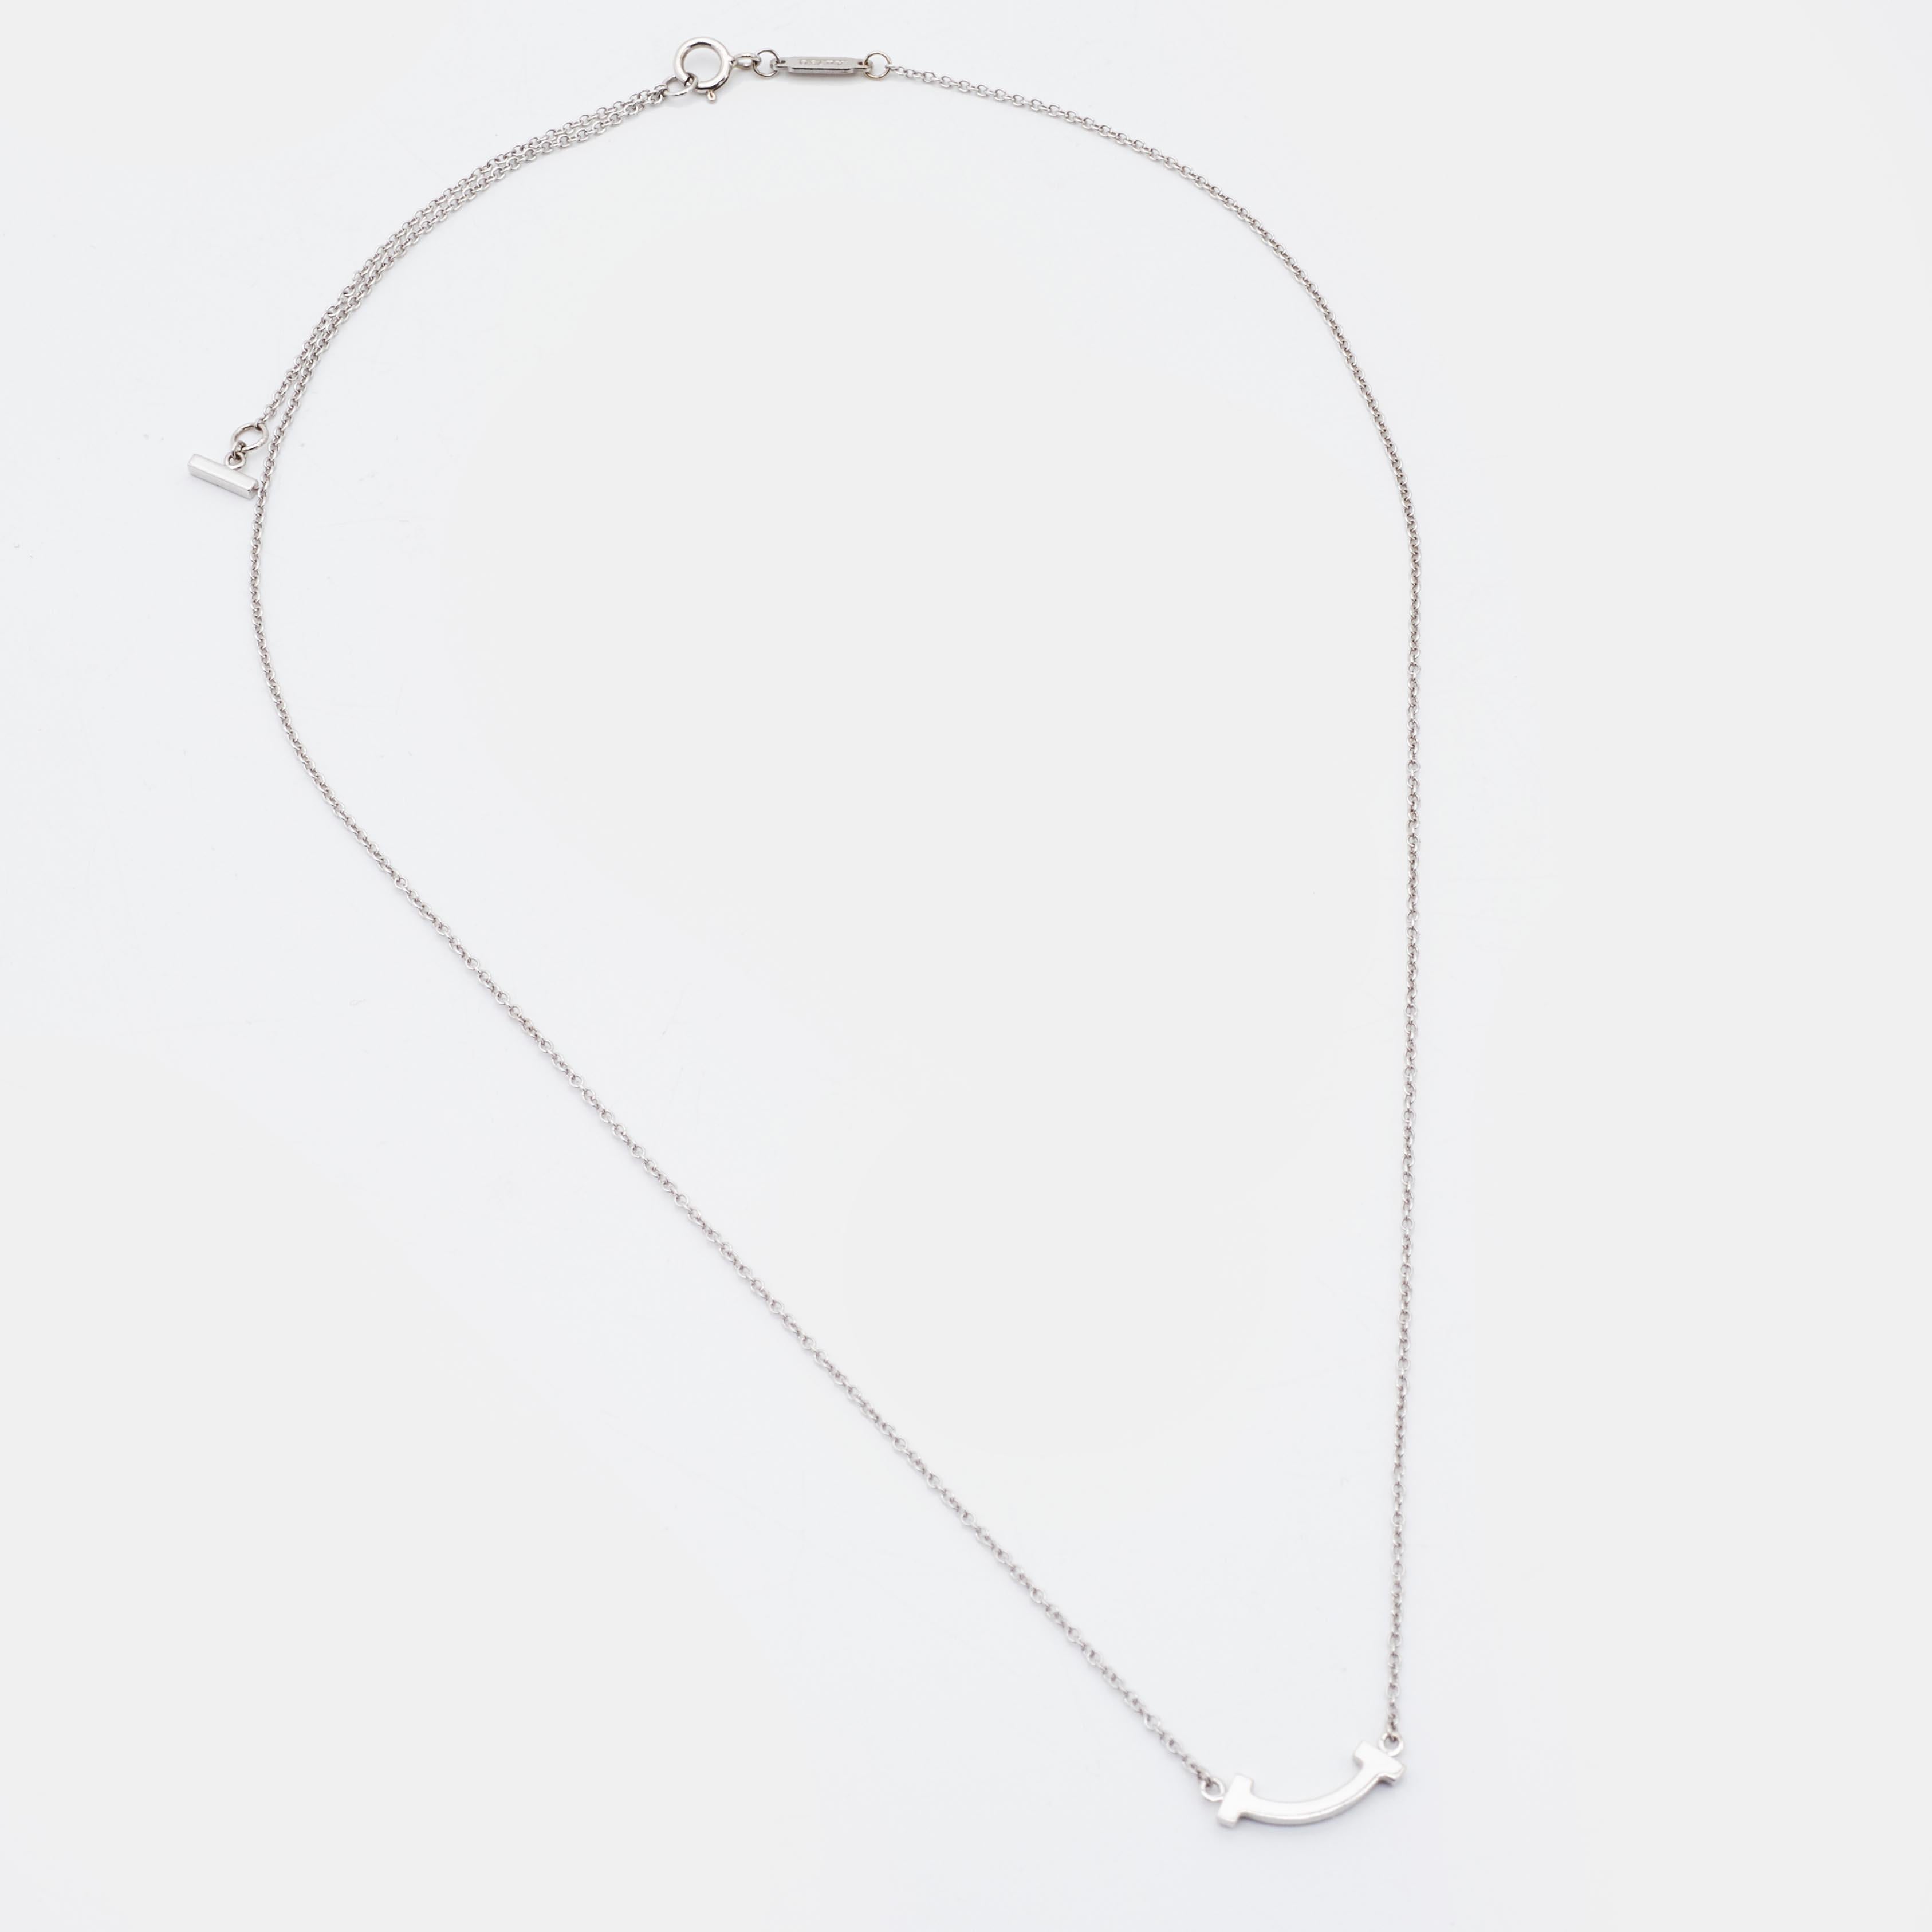 This Tiffany T Smile pendant necklace from Tiffany & Co. is a piece that you will always cherish wearing! Crafted from 18K white gold metal, it features a slender chain carrying a diamond-embellished T bar pendant that is shaped to resemble a smile.